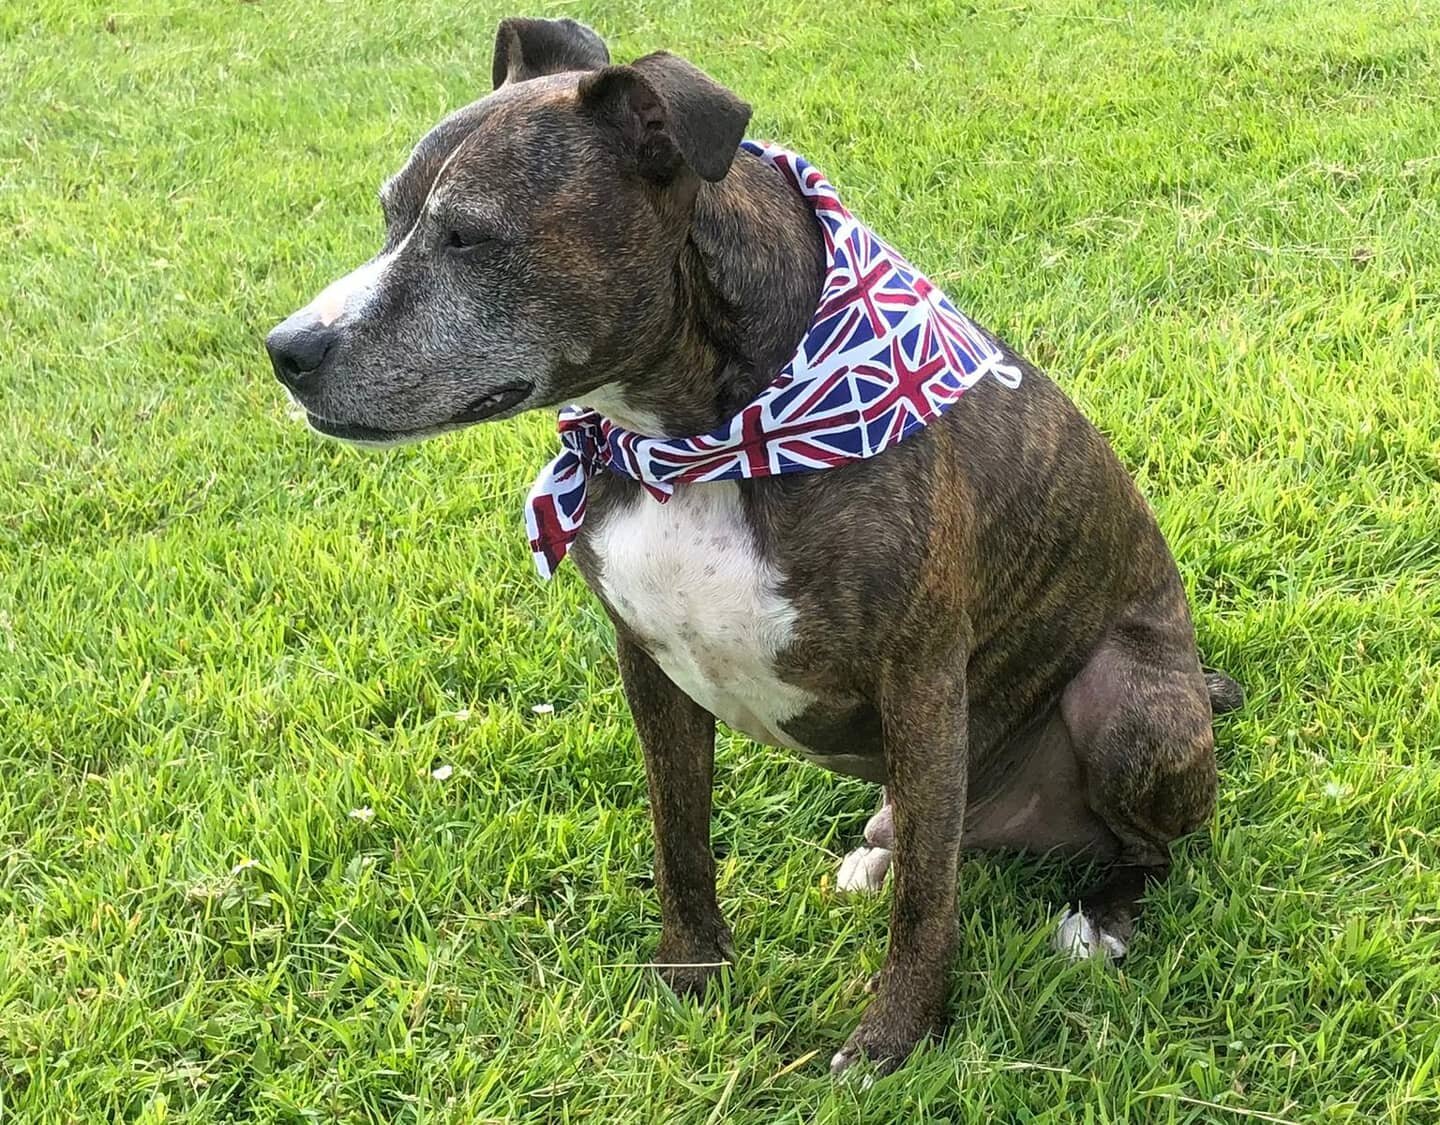 Ok, I admit it, I'm not a football fan. So while my family are downstairs watching the match this evening,  I'll probably be sitting in bed with a cup of tea and Netflix.

I do wish us well though and Aston will be wearing his union flag bandana with